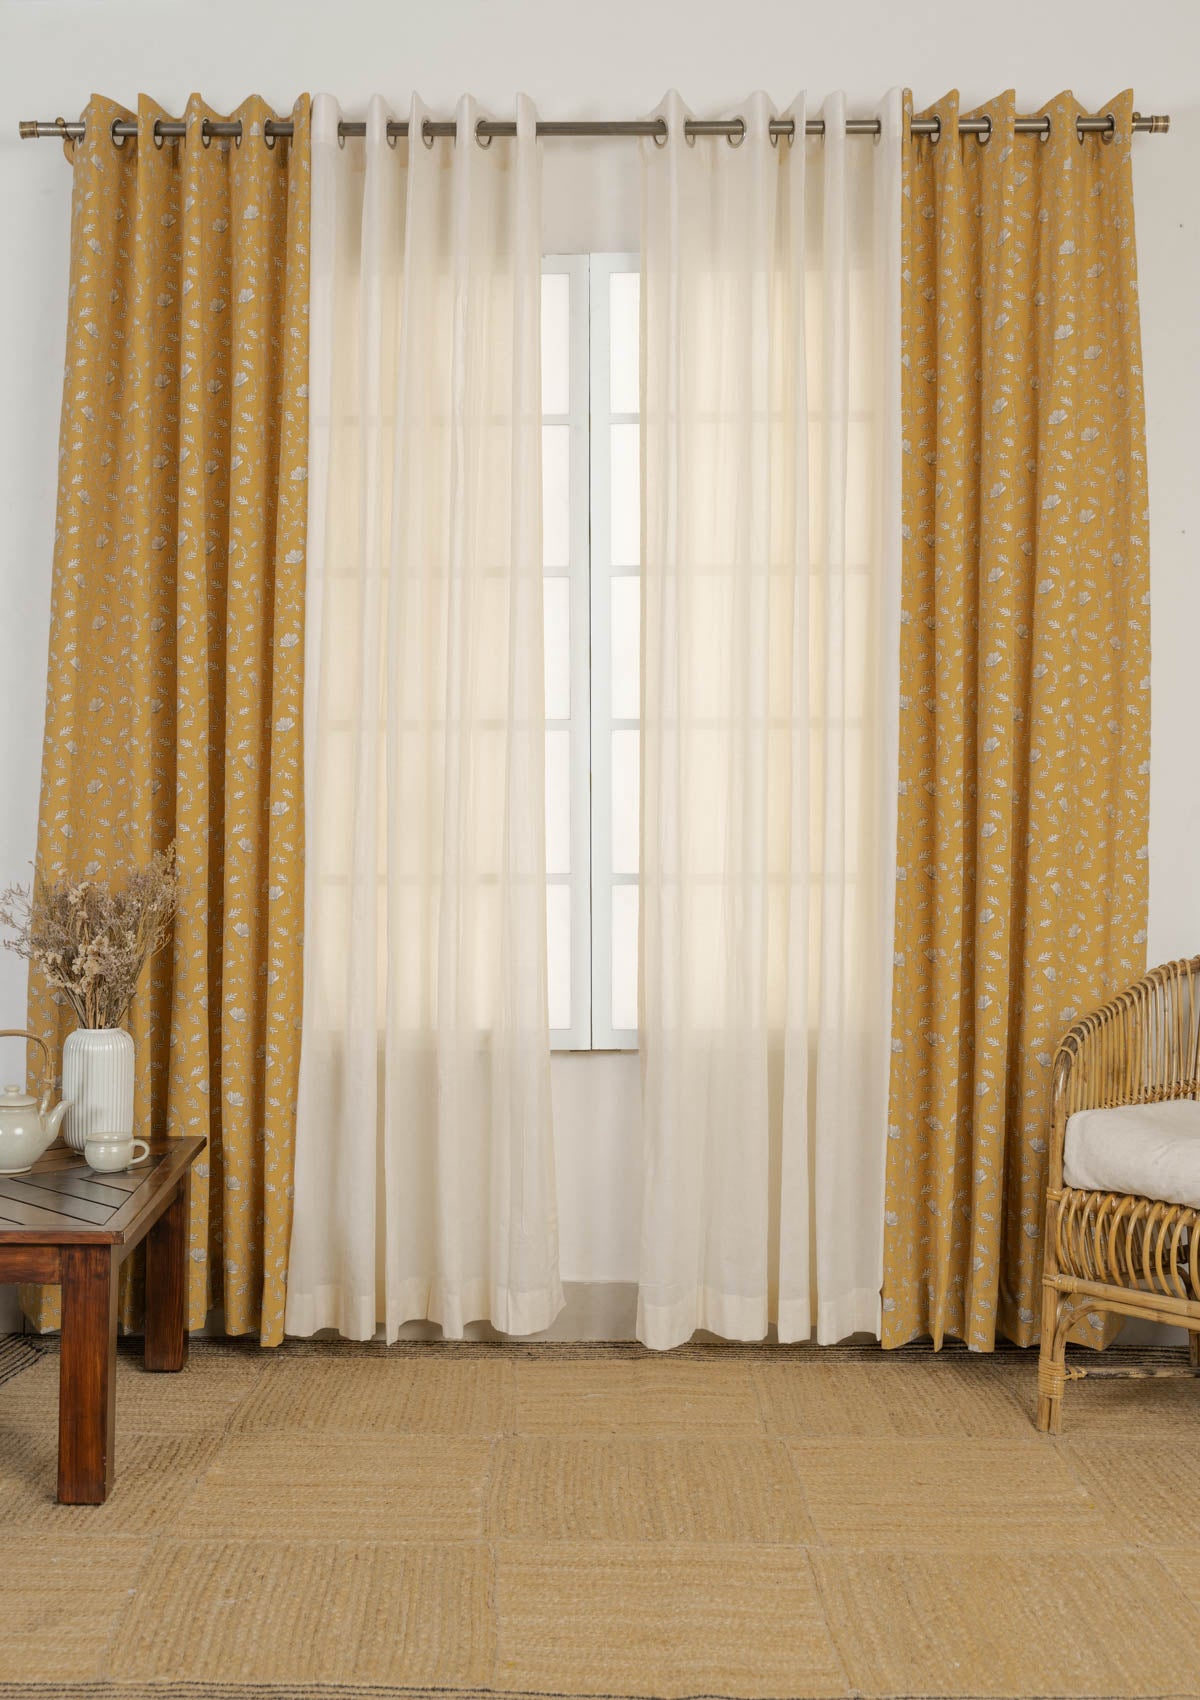 Eden floral cotton mustard with Solid sheer 100% cotton curtains for living room - Set of 4